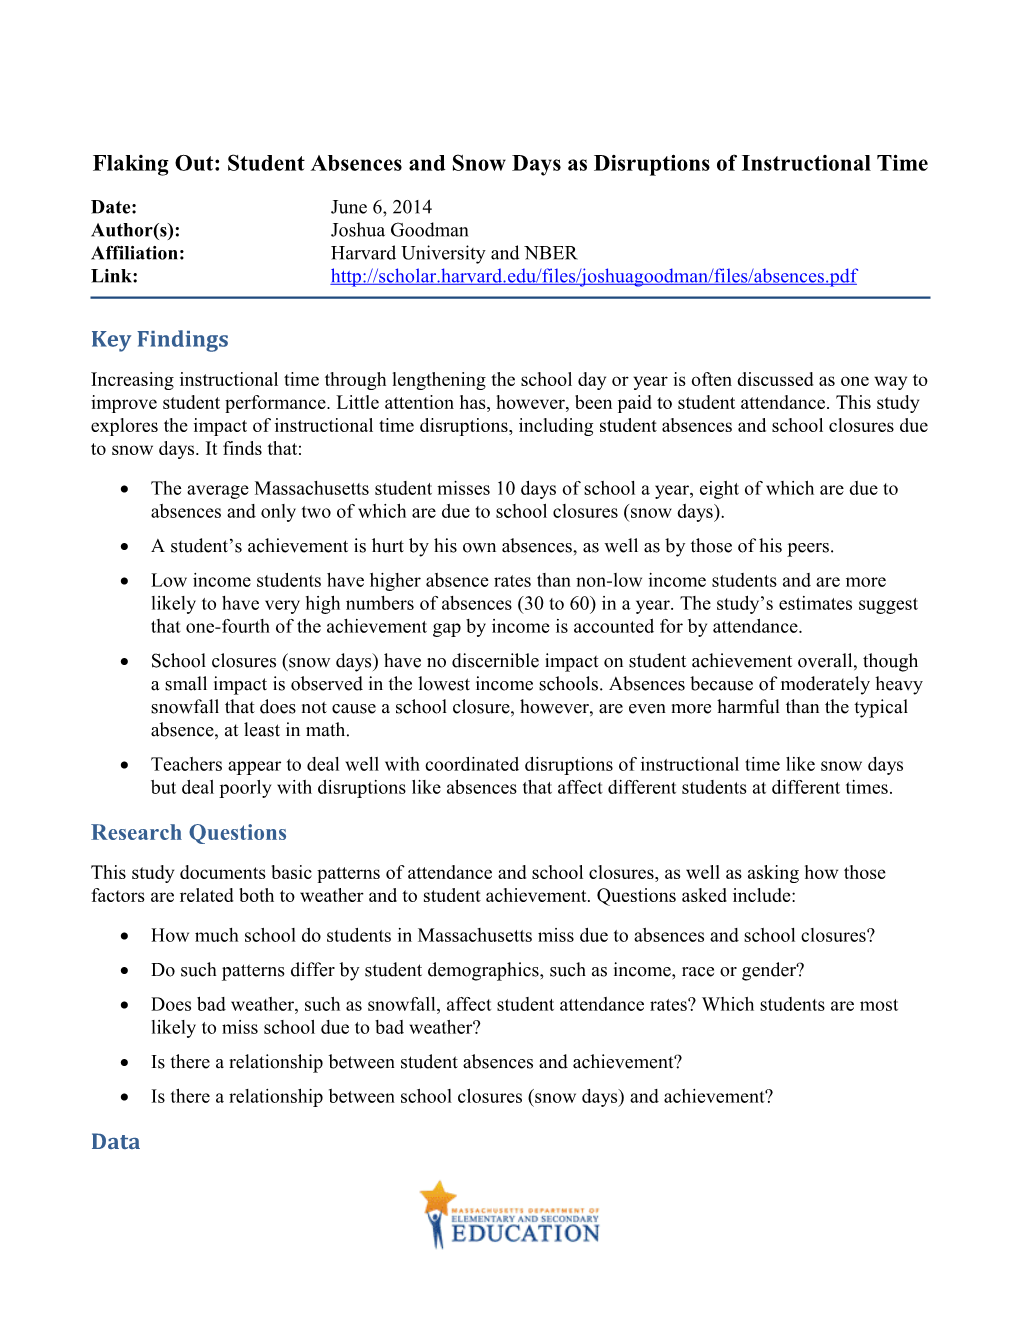 Flaking Out: Student Absences and Snow Days As Disruptions of Instructional Time (June 2014)